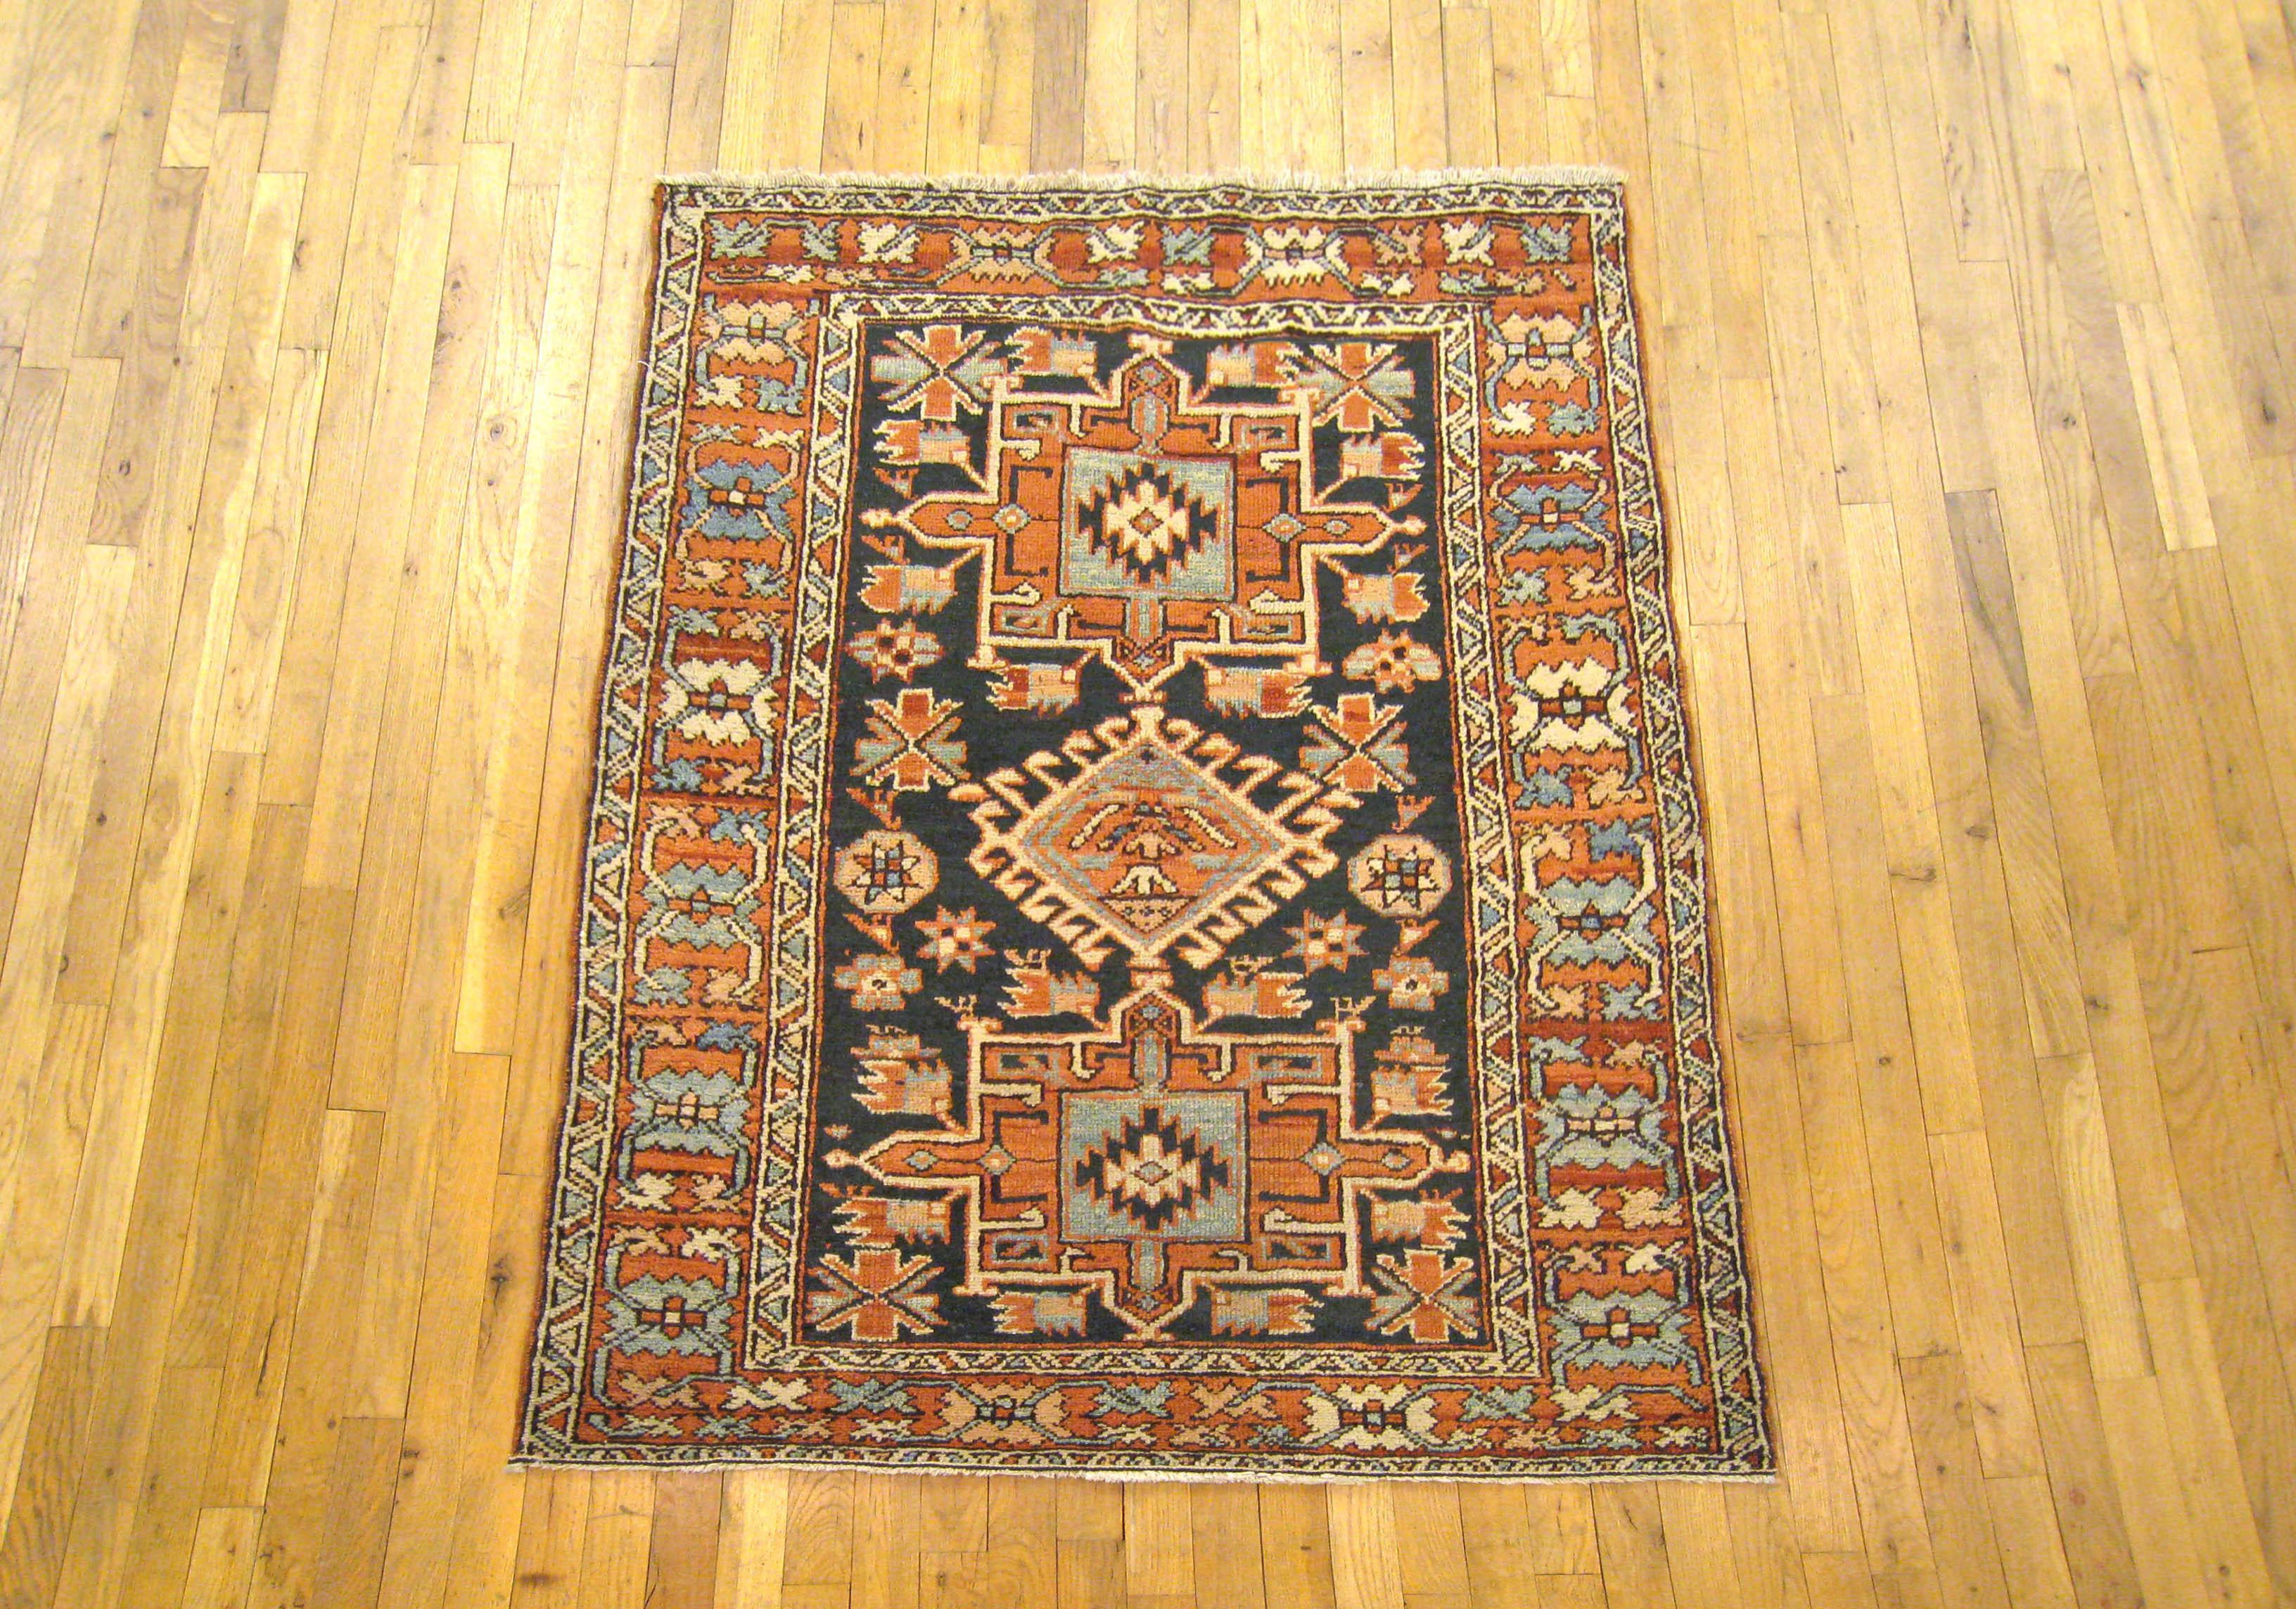 An antique Persian Heriz Karaja oriental rug, circa 1920, size 4'2 x 3'7. This handsome hand-knotted wool rug features a symmetrical series of central medallions on the uncluttered navy blue primary field. The field is enclosed within a vibrant red